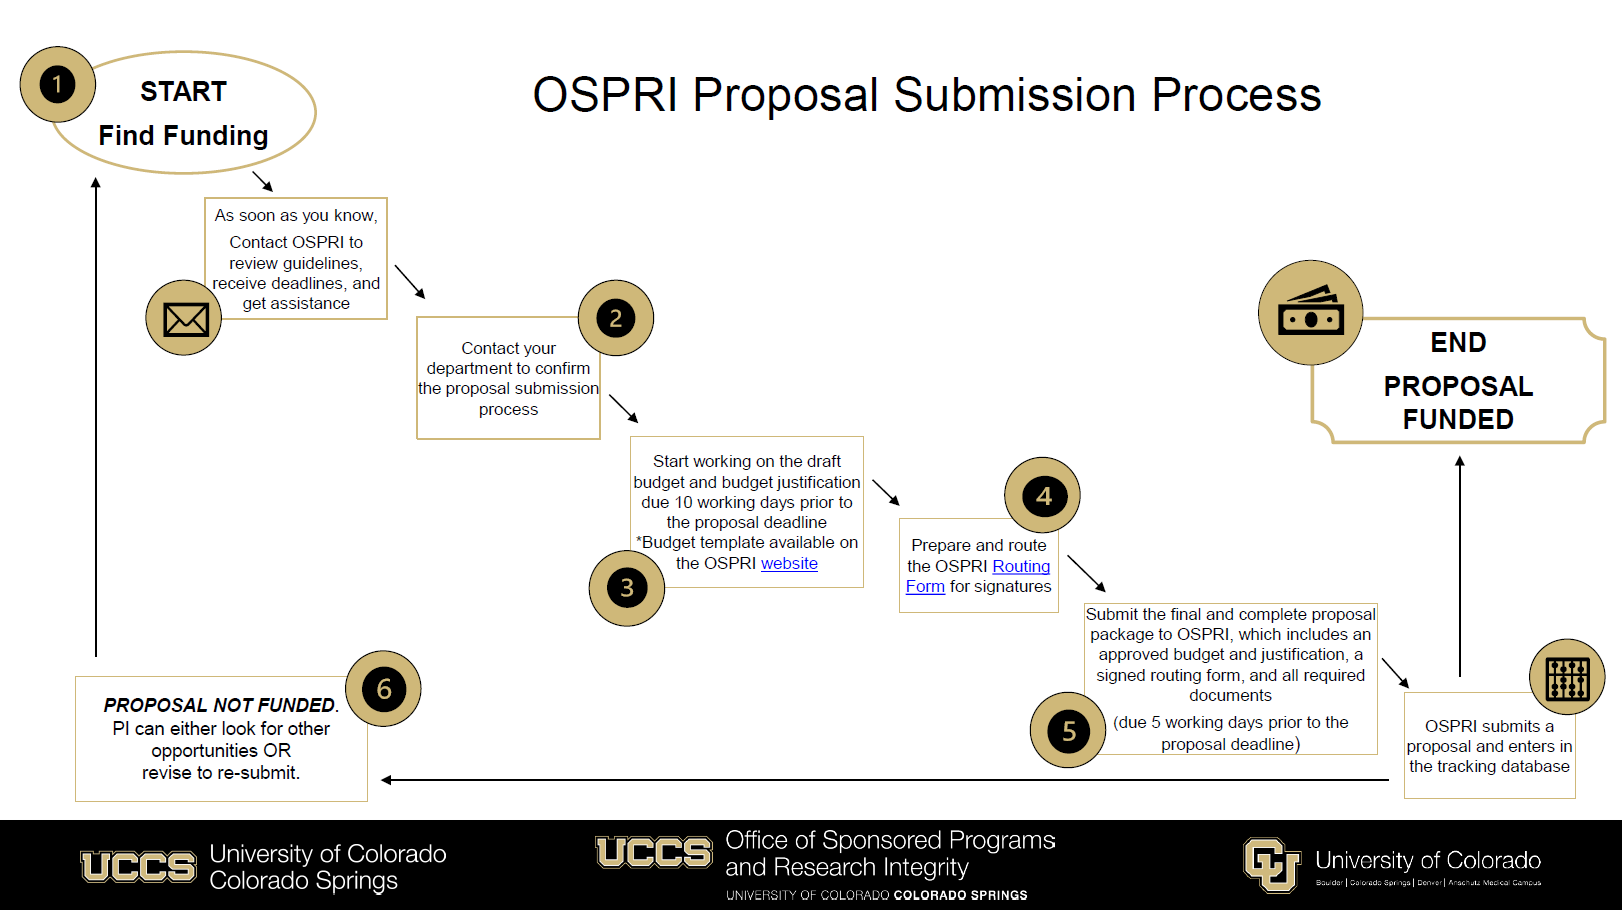 Email osp@uccs.edu for a summary of the submission process